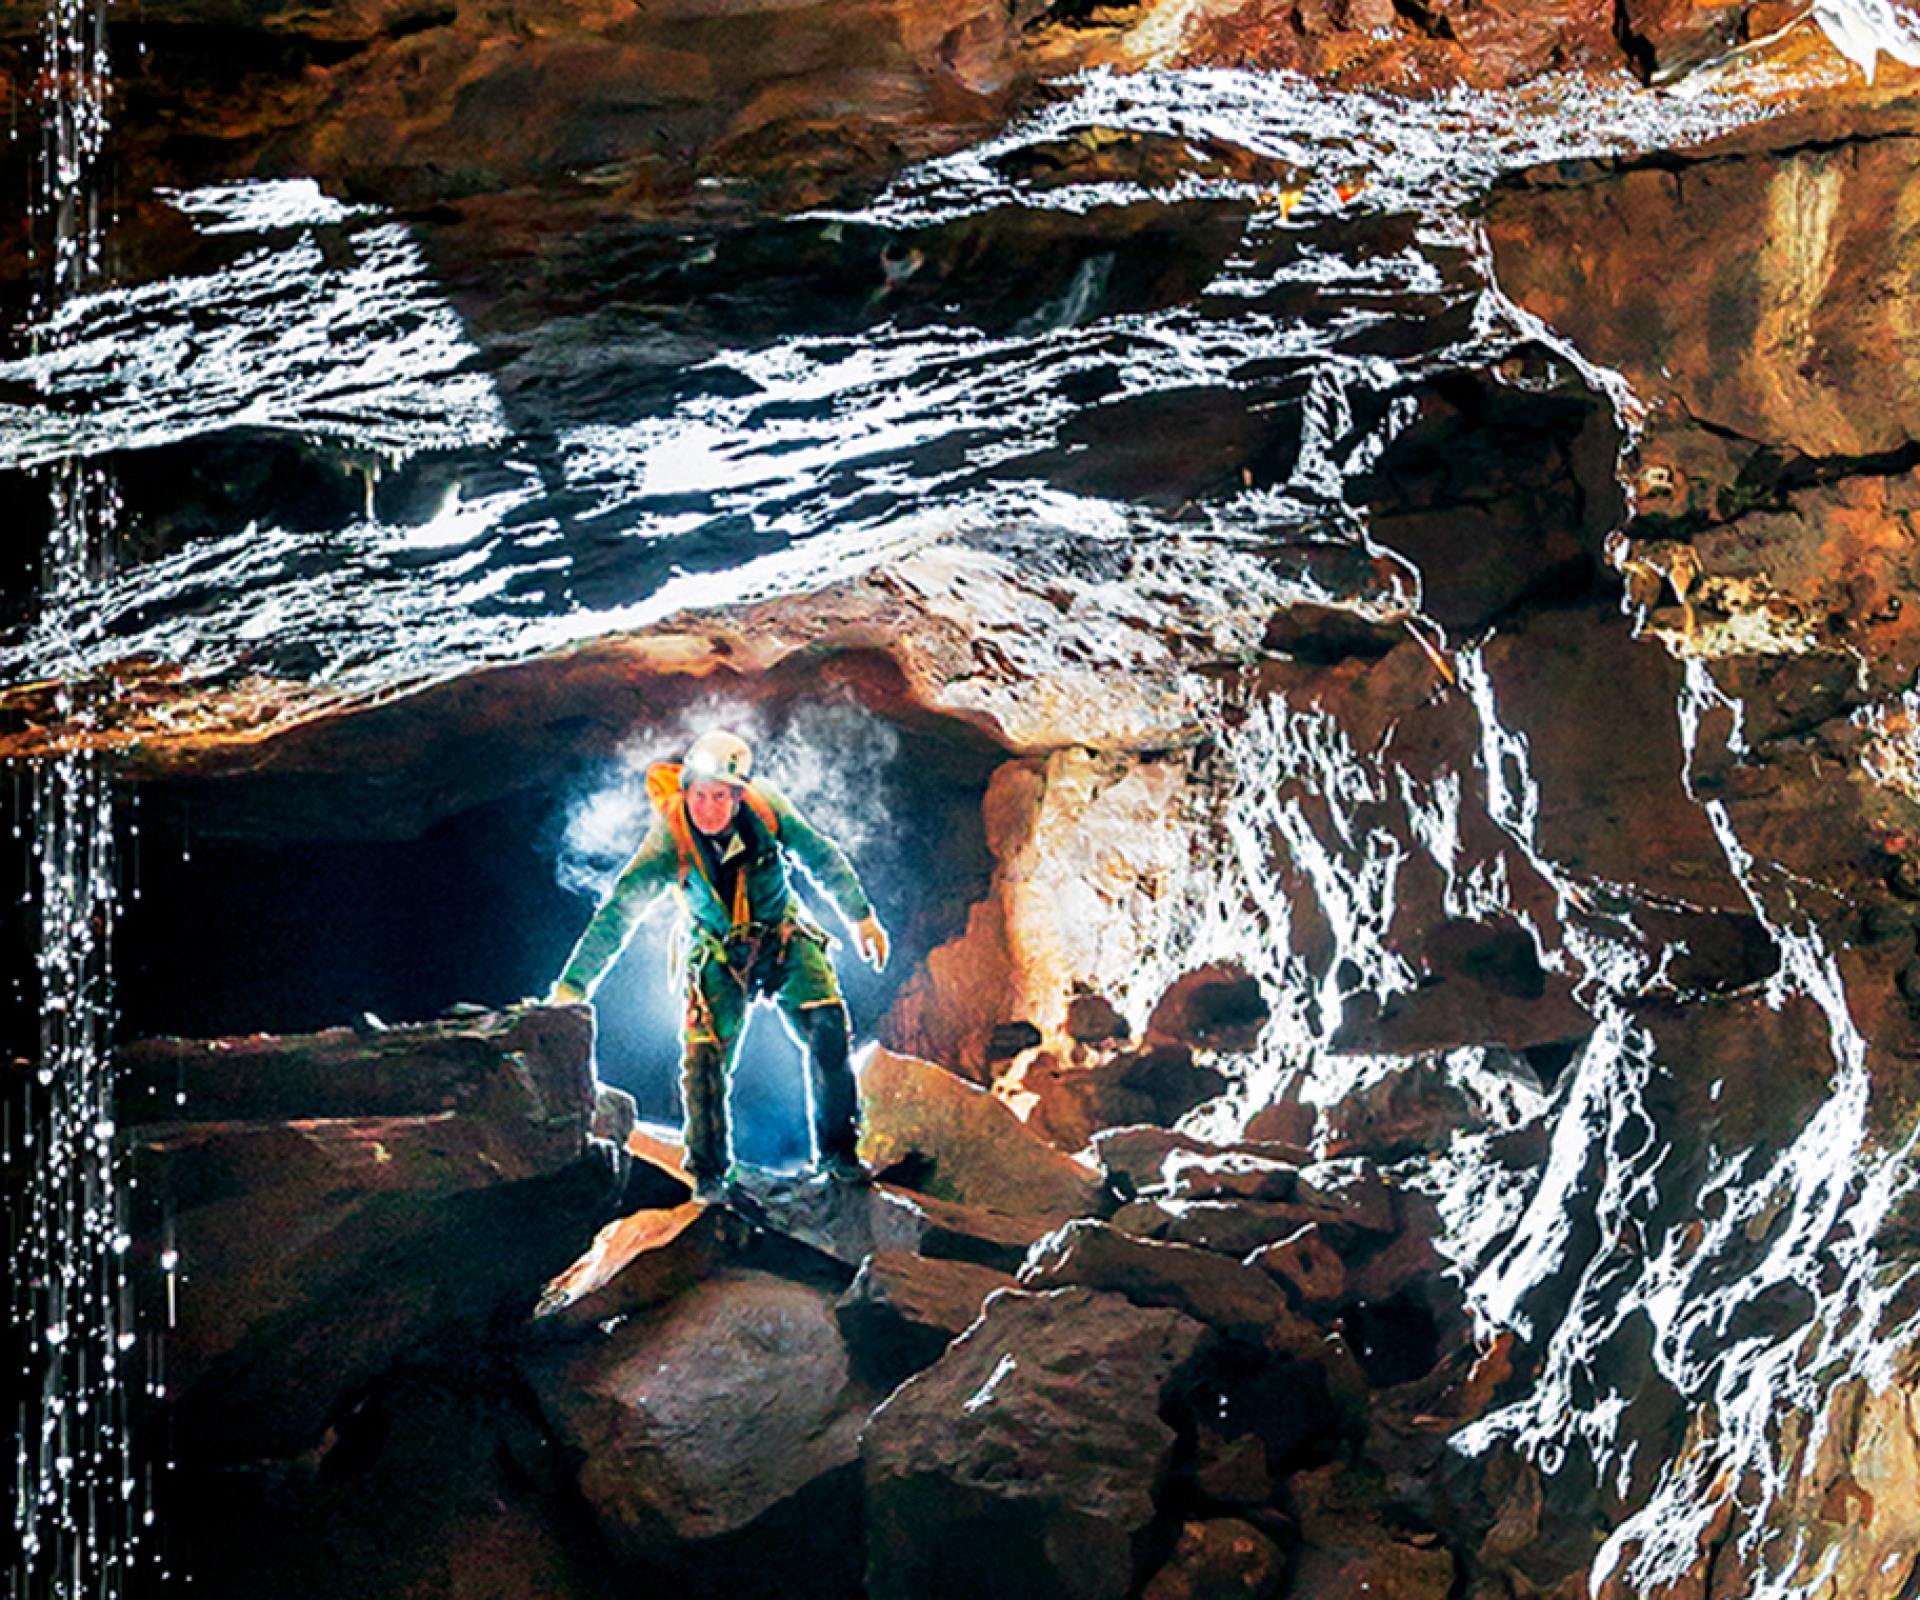 BRGM is responsible for groundwater monitoring. Underground river of Malaval (Lozère, France). © Rémi FLAMENT